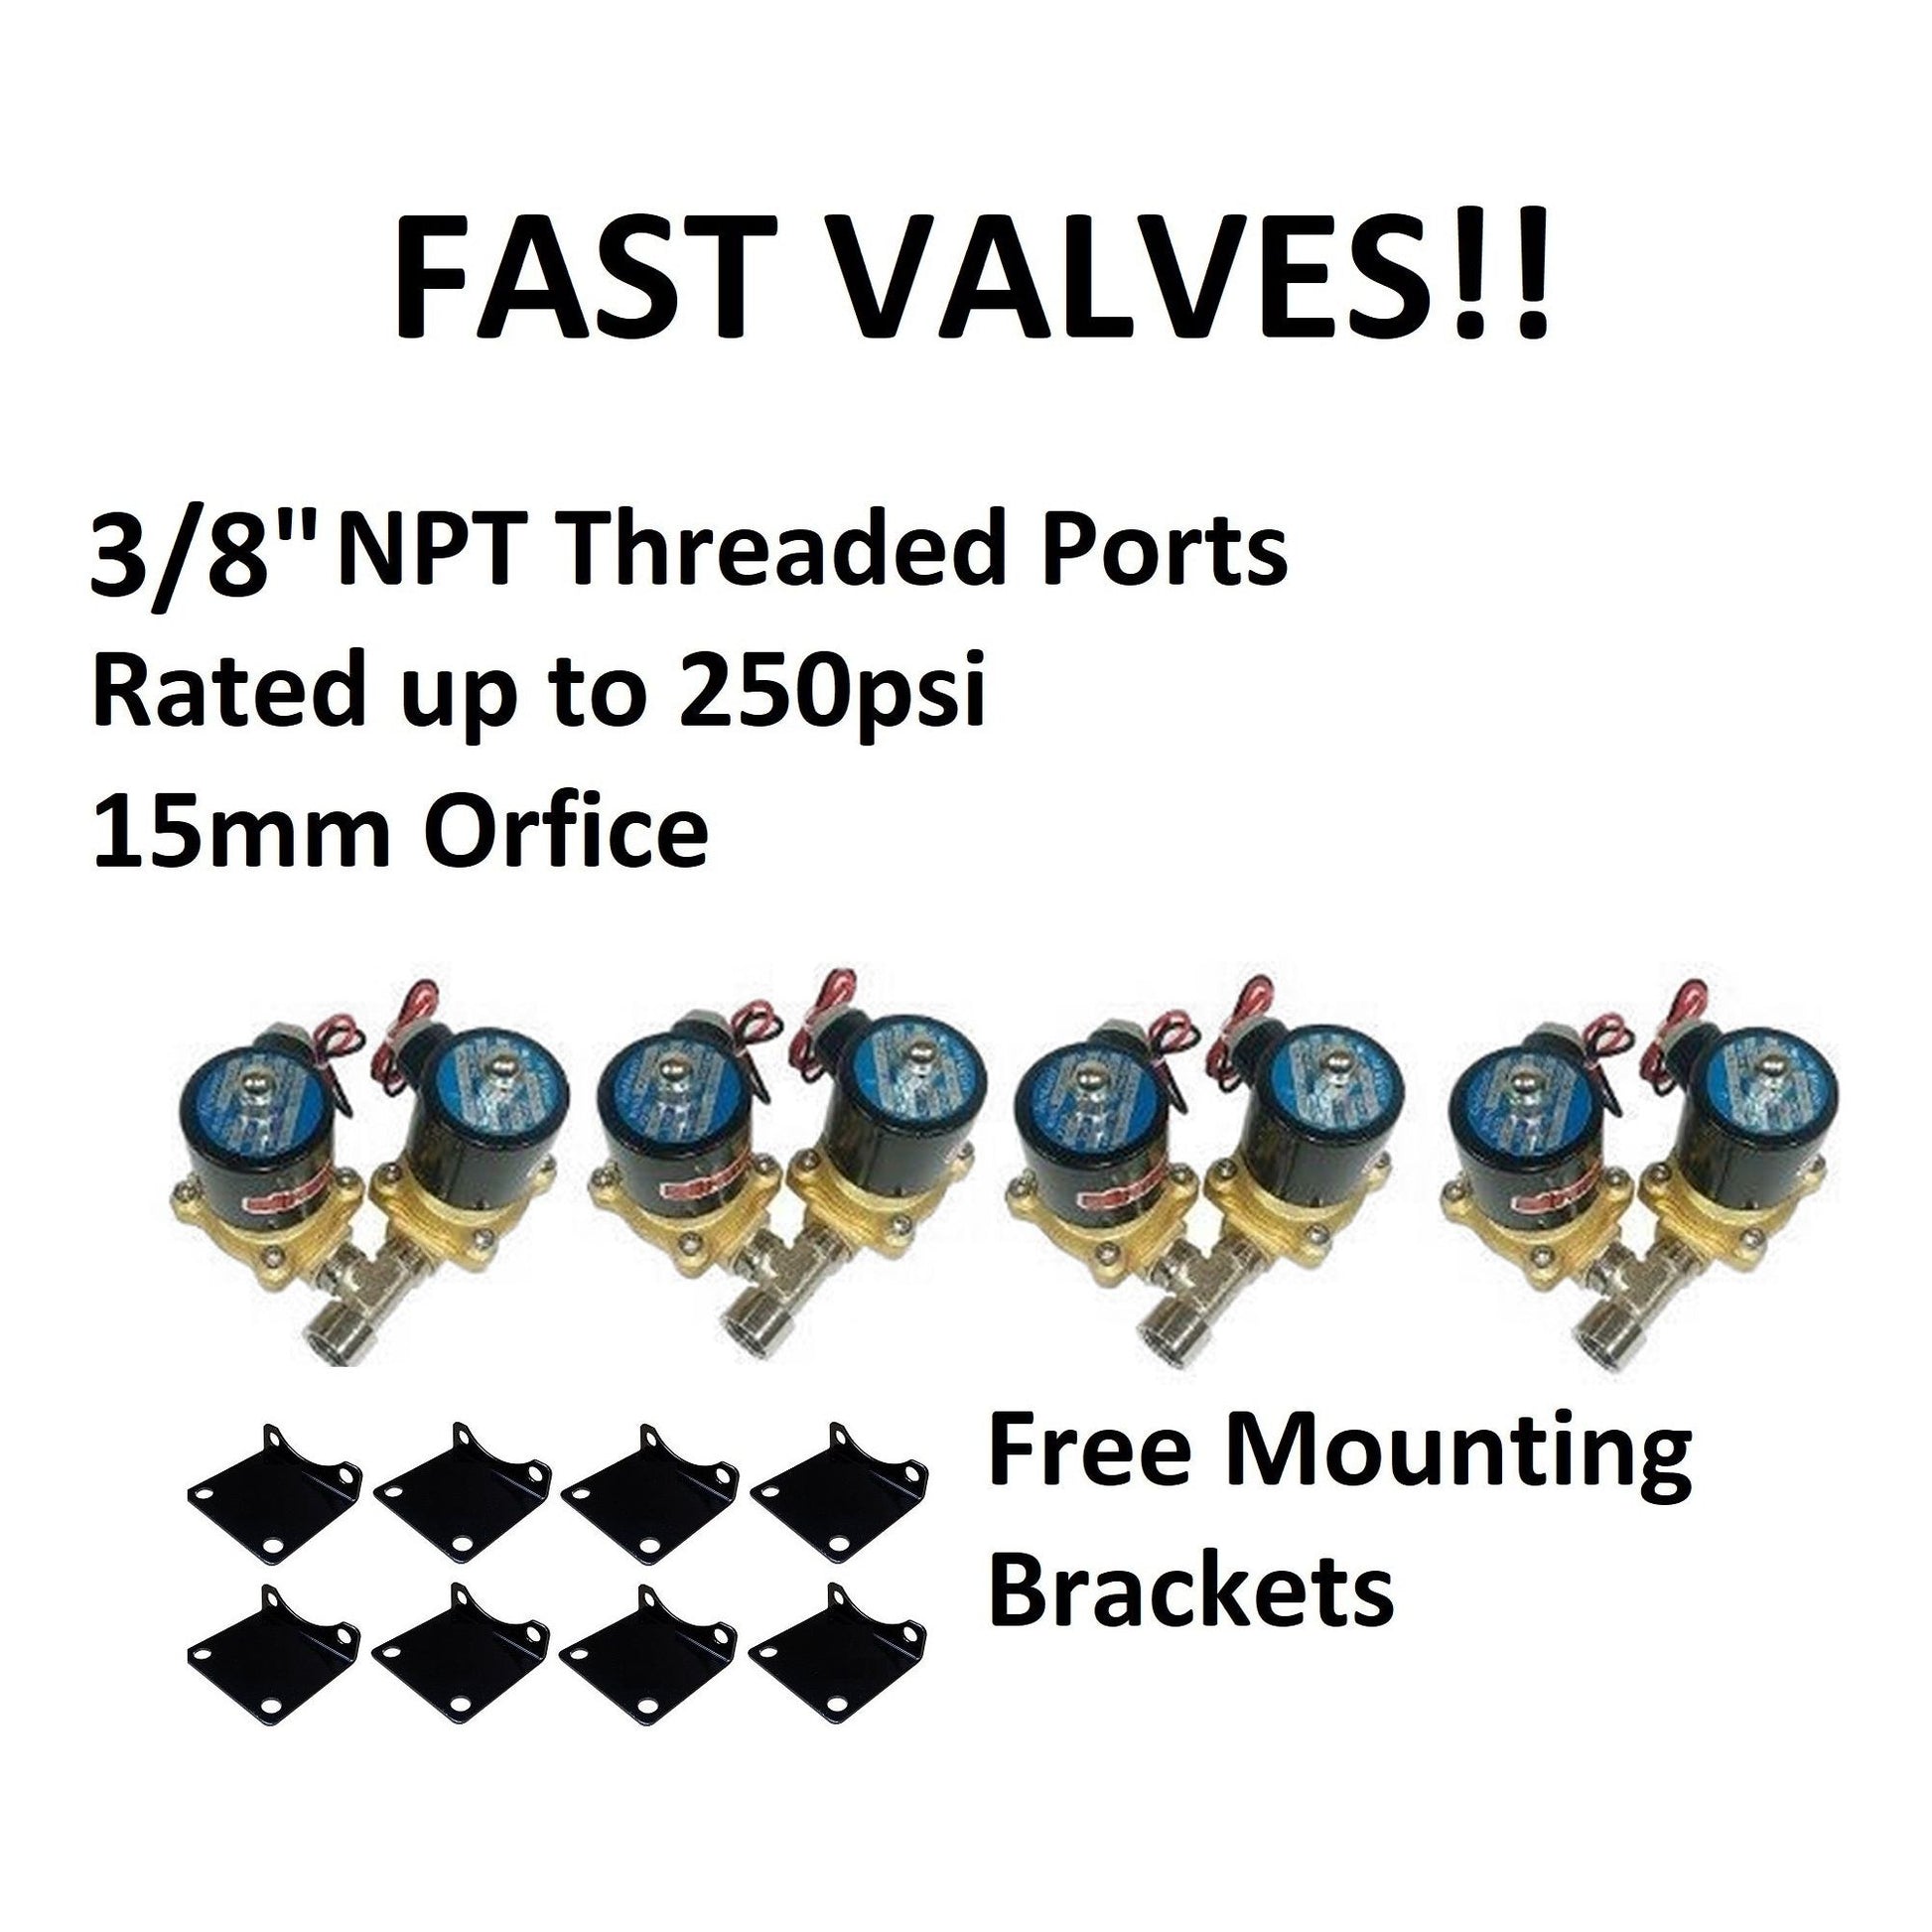 Fast flow brass valves with mounts with free mounting brackets